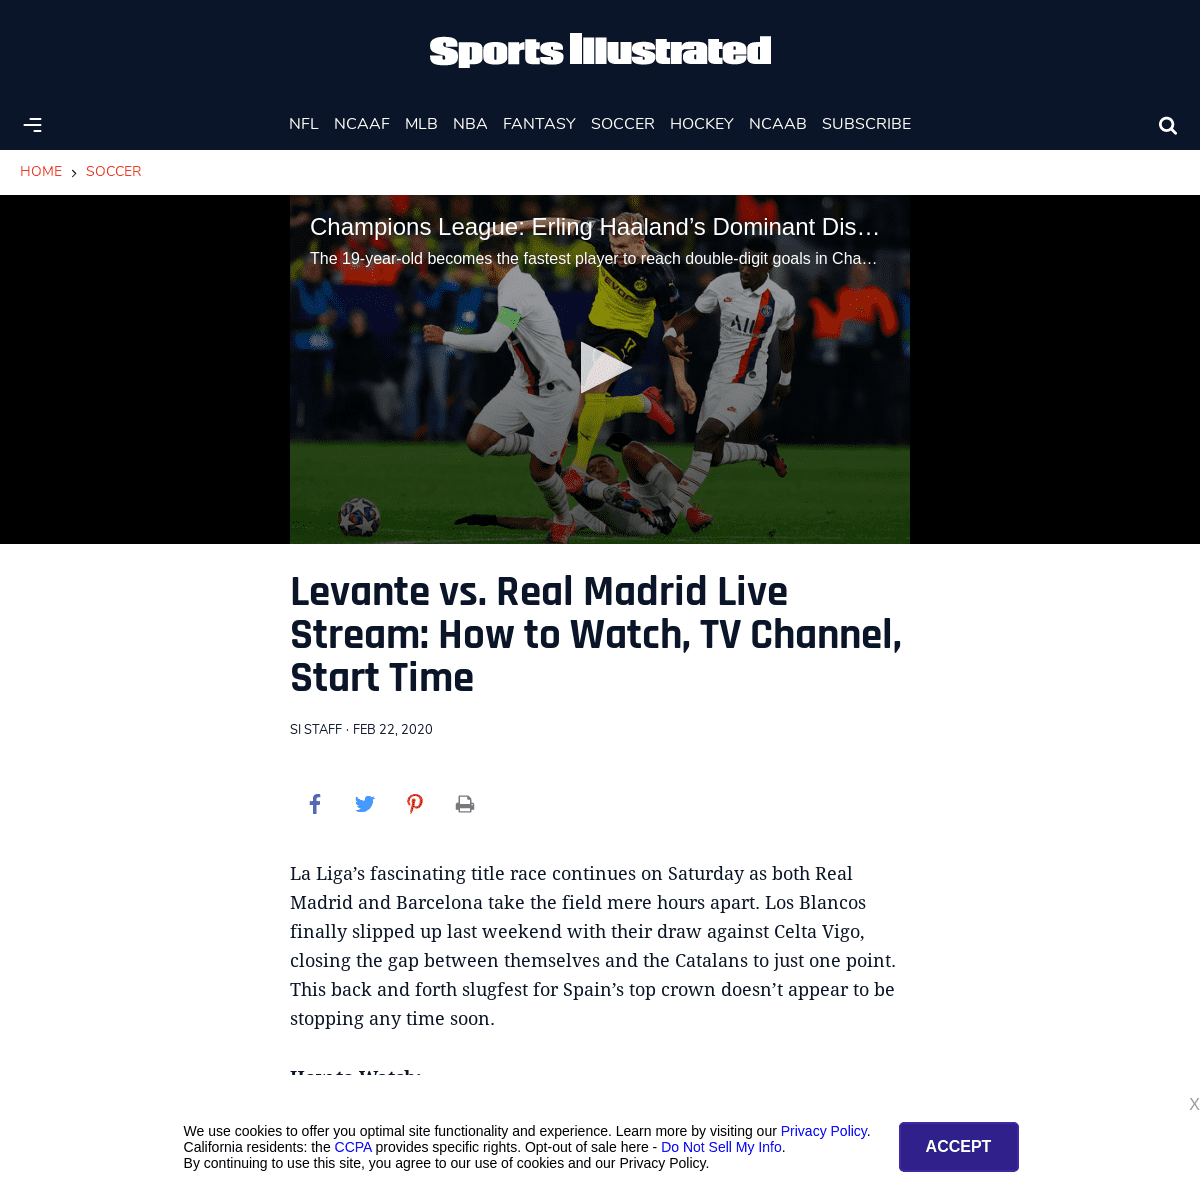 A complete backup of www.si.com/soccer/2020/02/22/real-madrid-levante-live-stream-how-to-watch-tv-channel-time